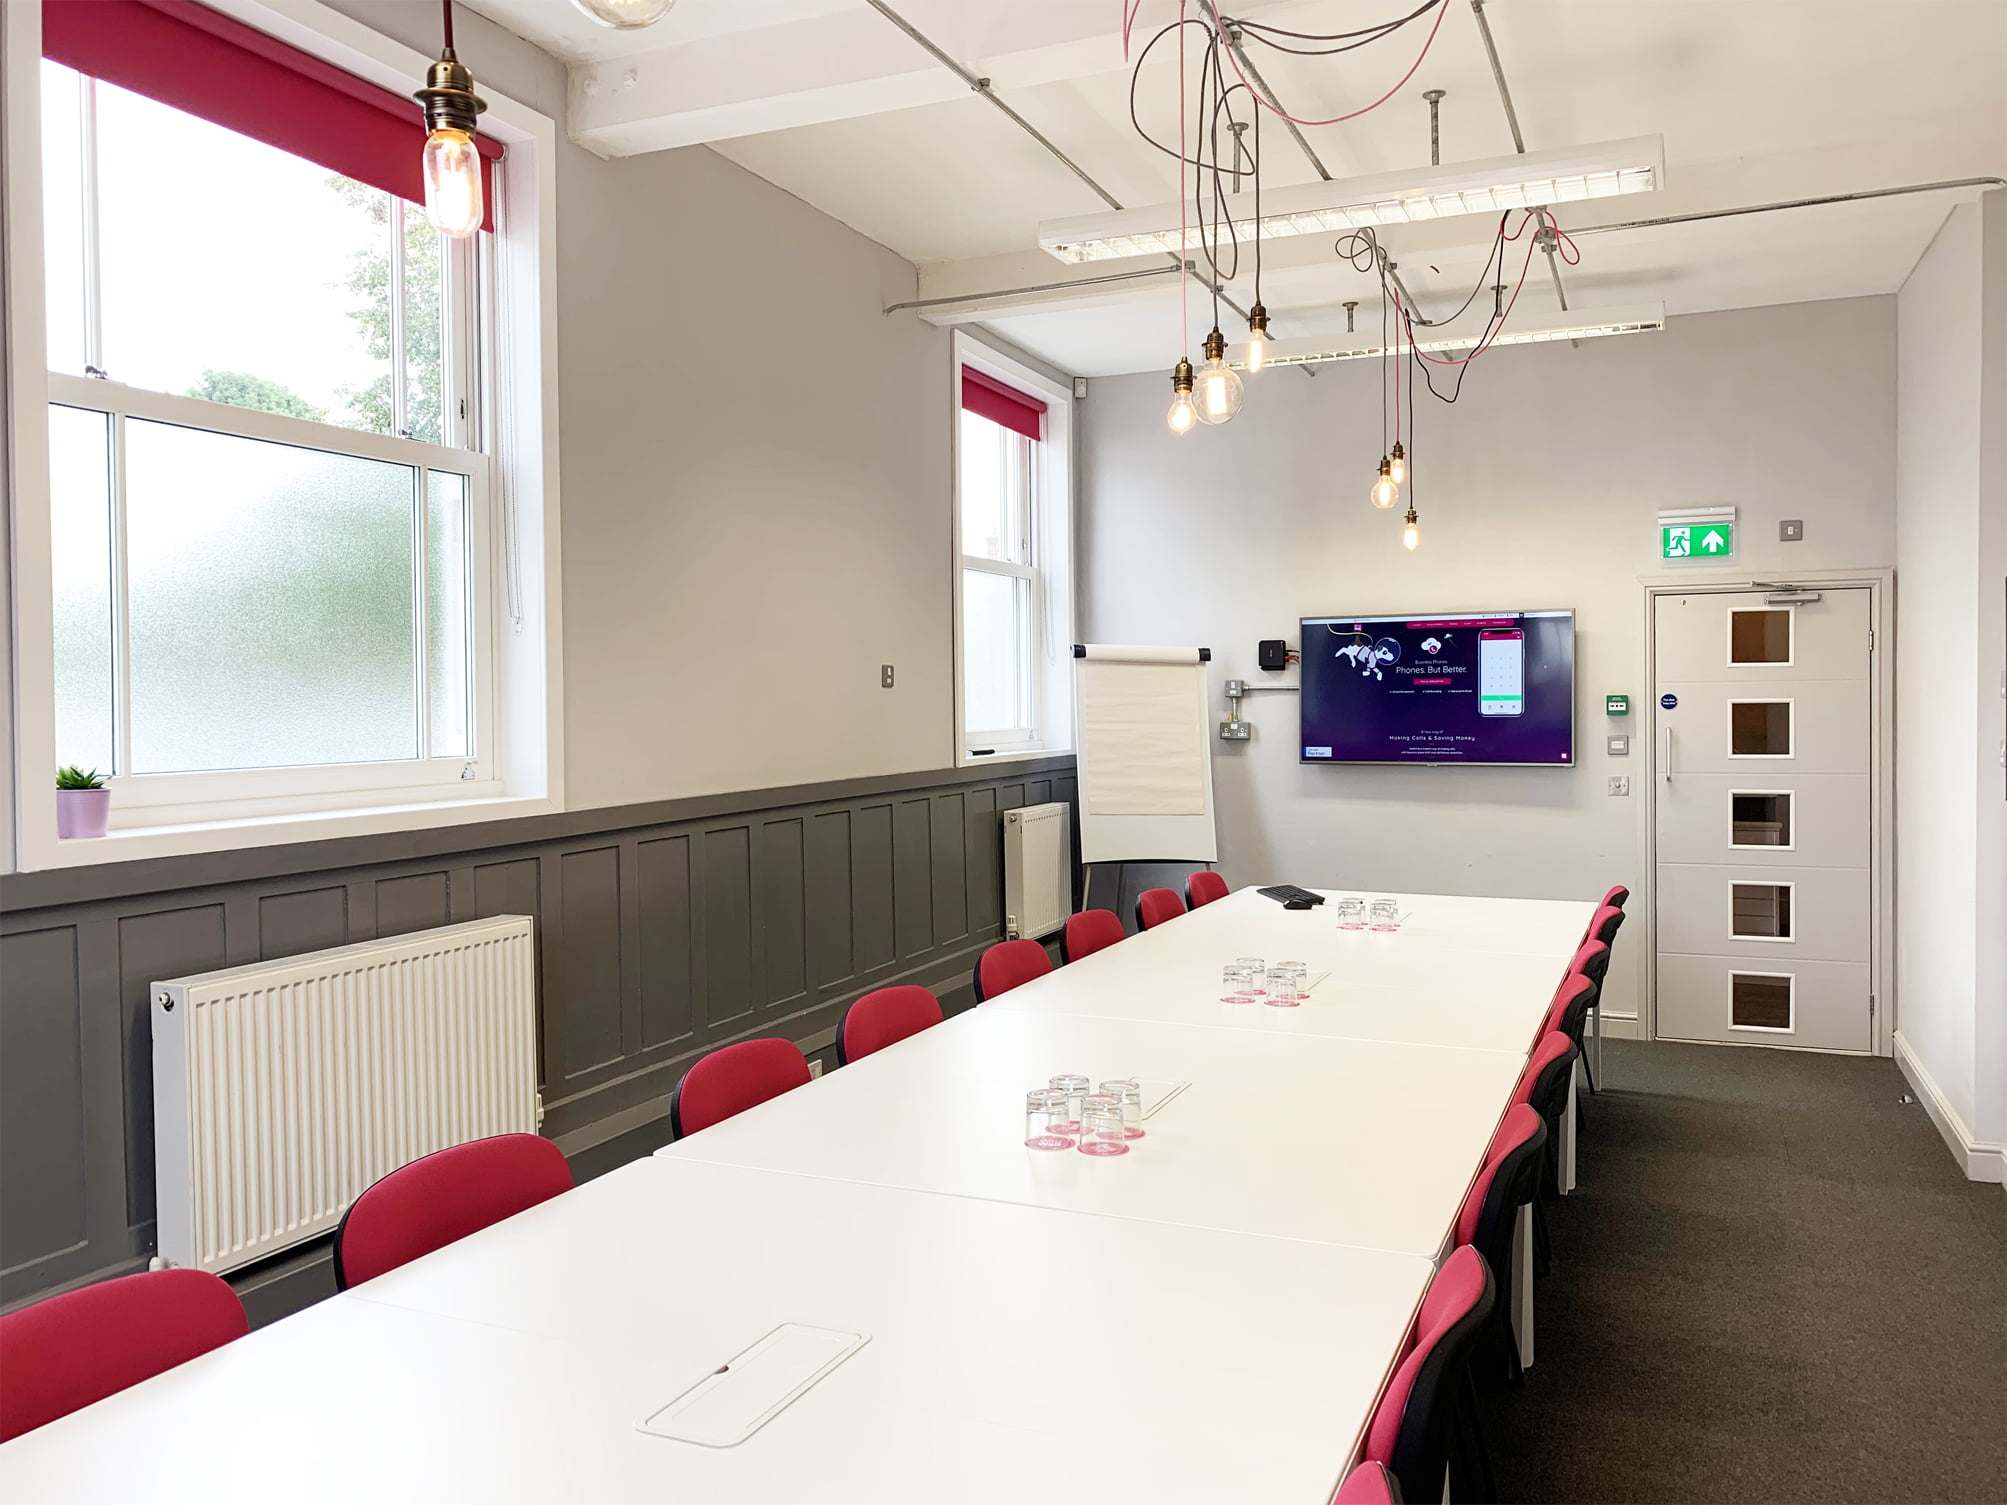 Hire one of our Meeting Rooms in Nottingham...?